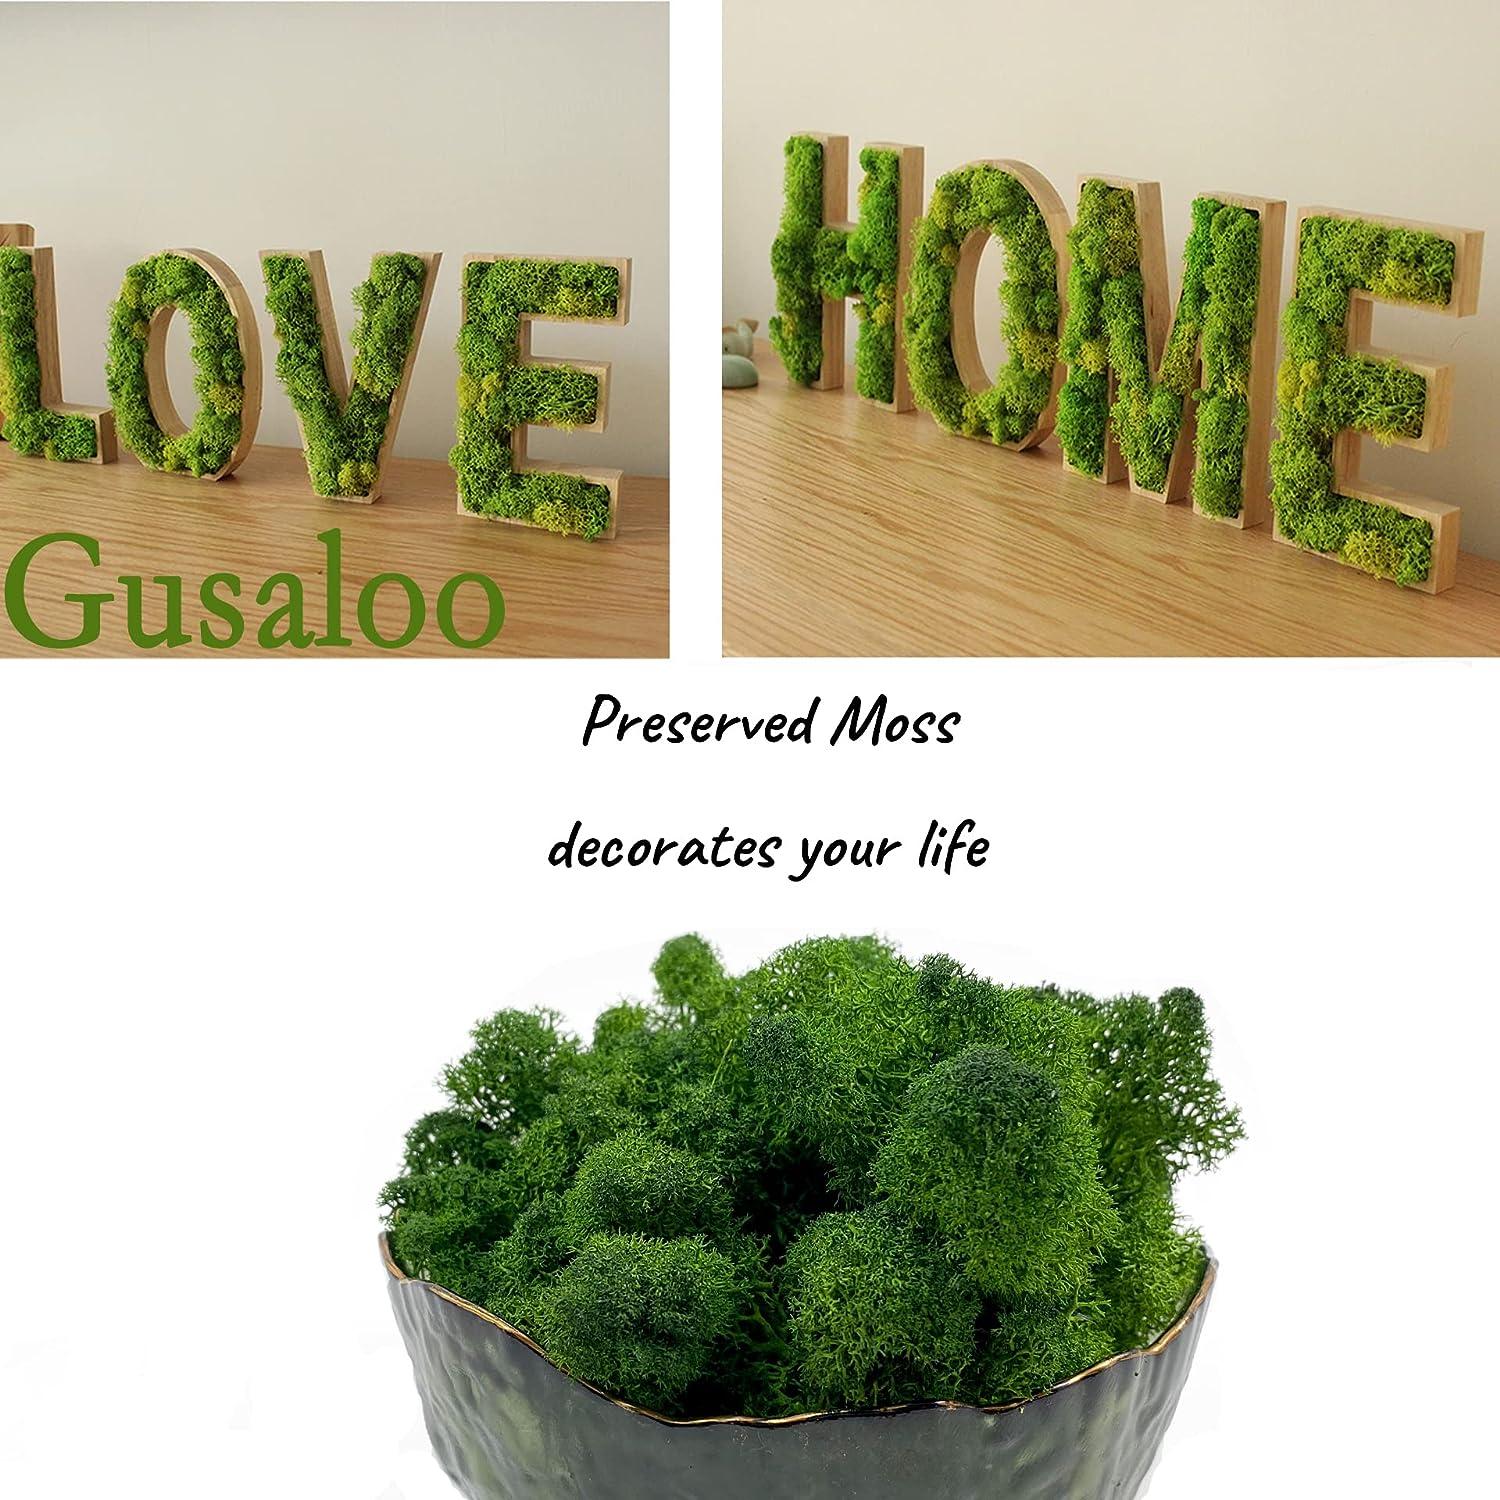 3 Sq. Ft Preserved Moss for Potted Plants Green Moss for Crafts Floral Moss  Decorative Moss for Table Decor DIY Wall Art Kit Terrariums Gardening  Florist Wedding Projects, 3 Colors : Buy